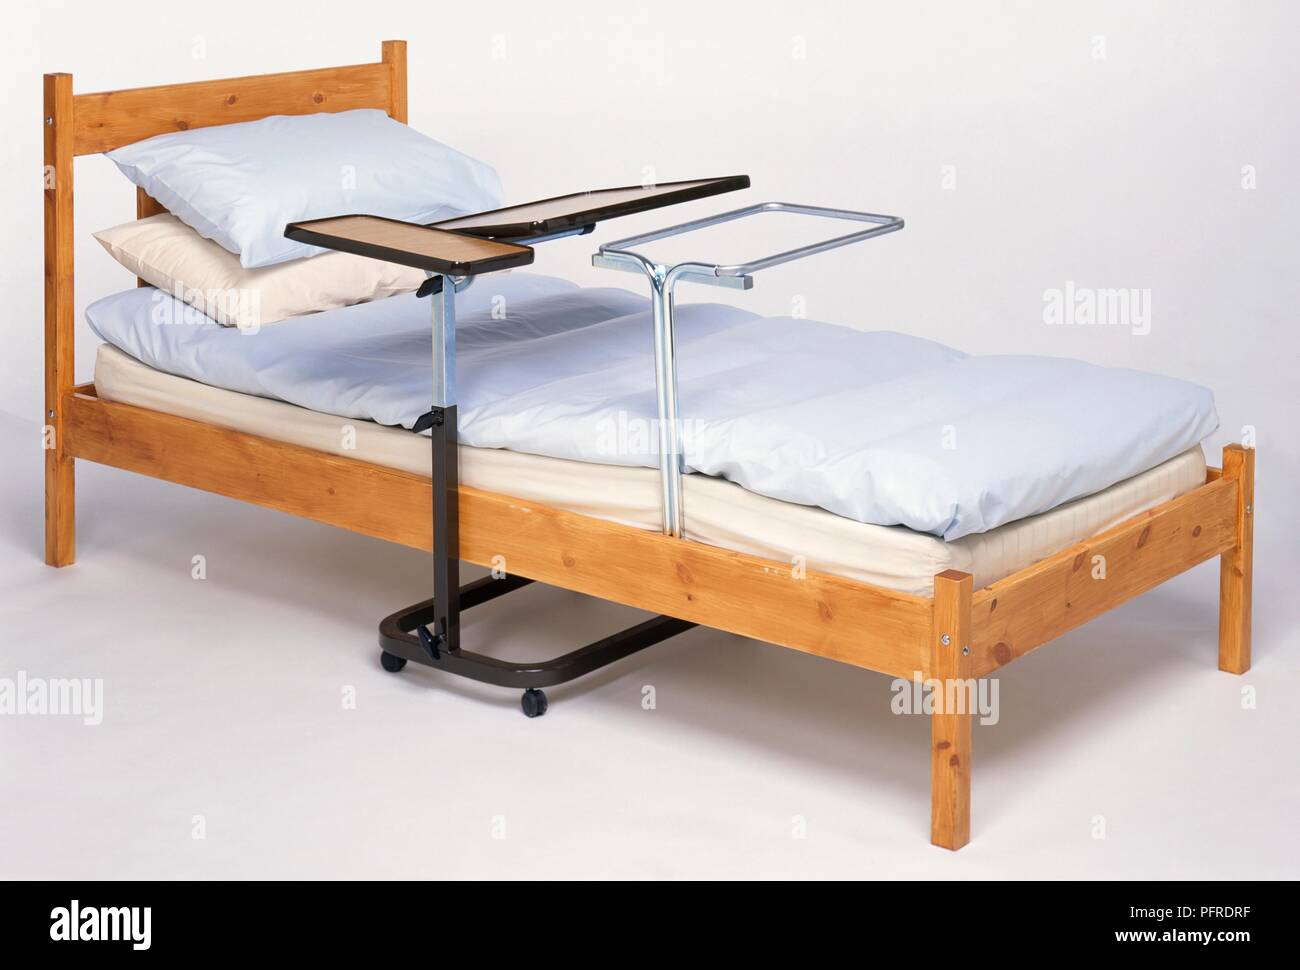 Adjustable bed table, bed blanket raiser and bed Stock Photo